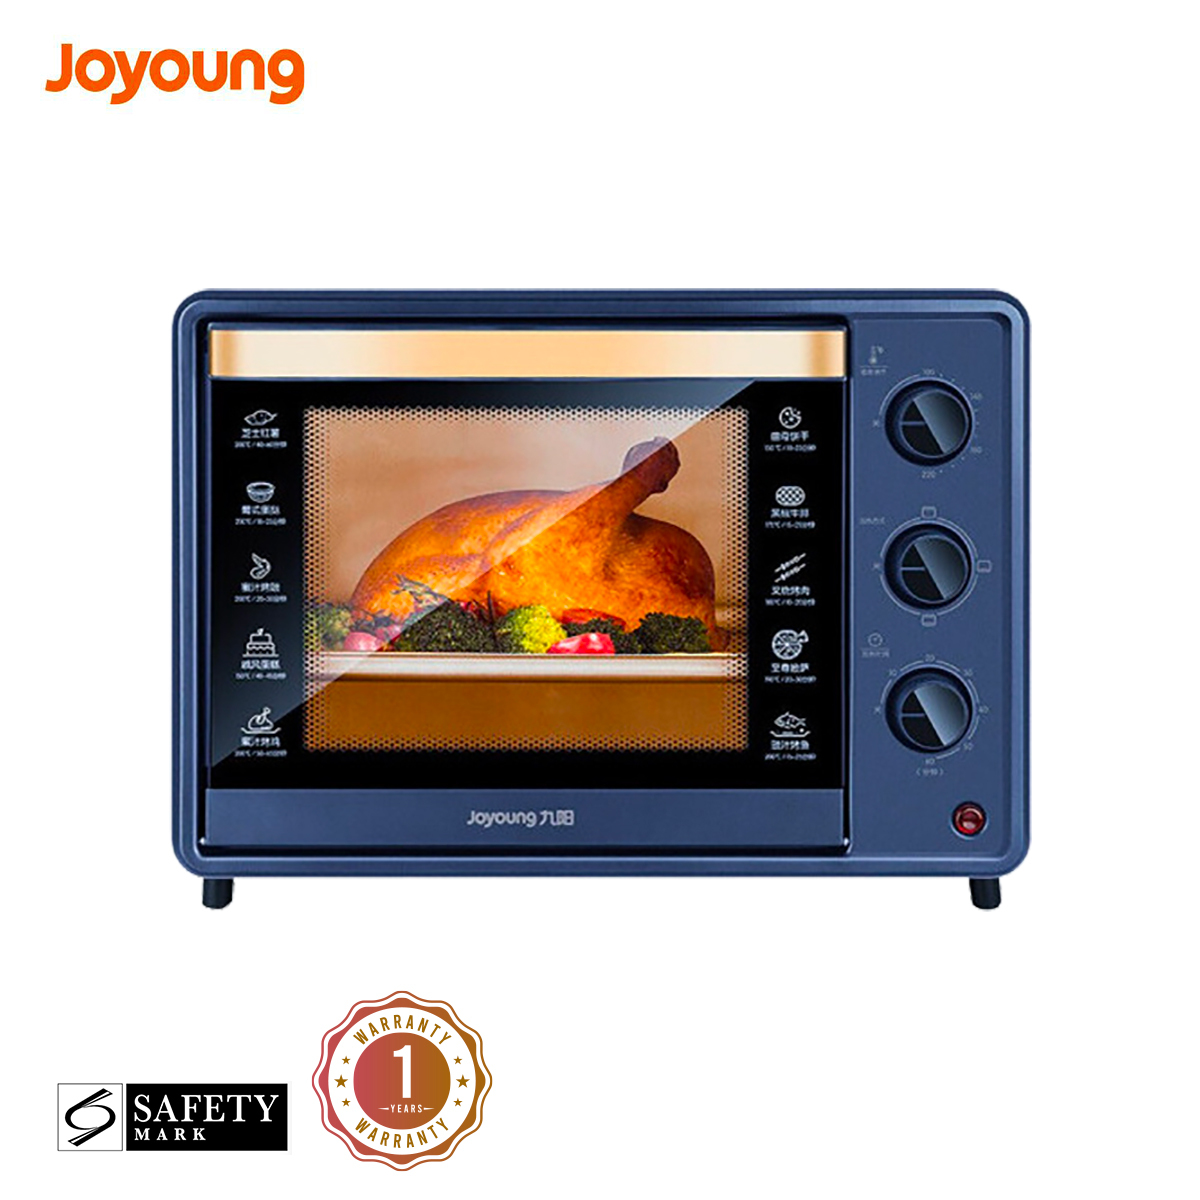 Joyoung 32L Electric Oven